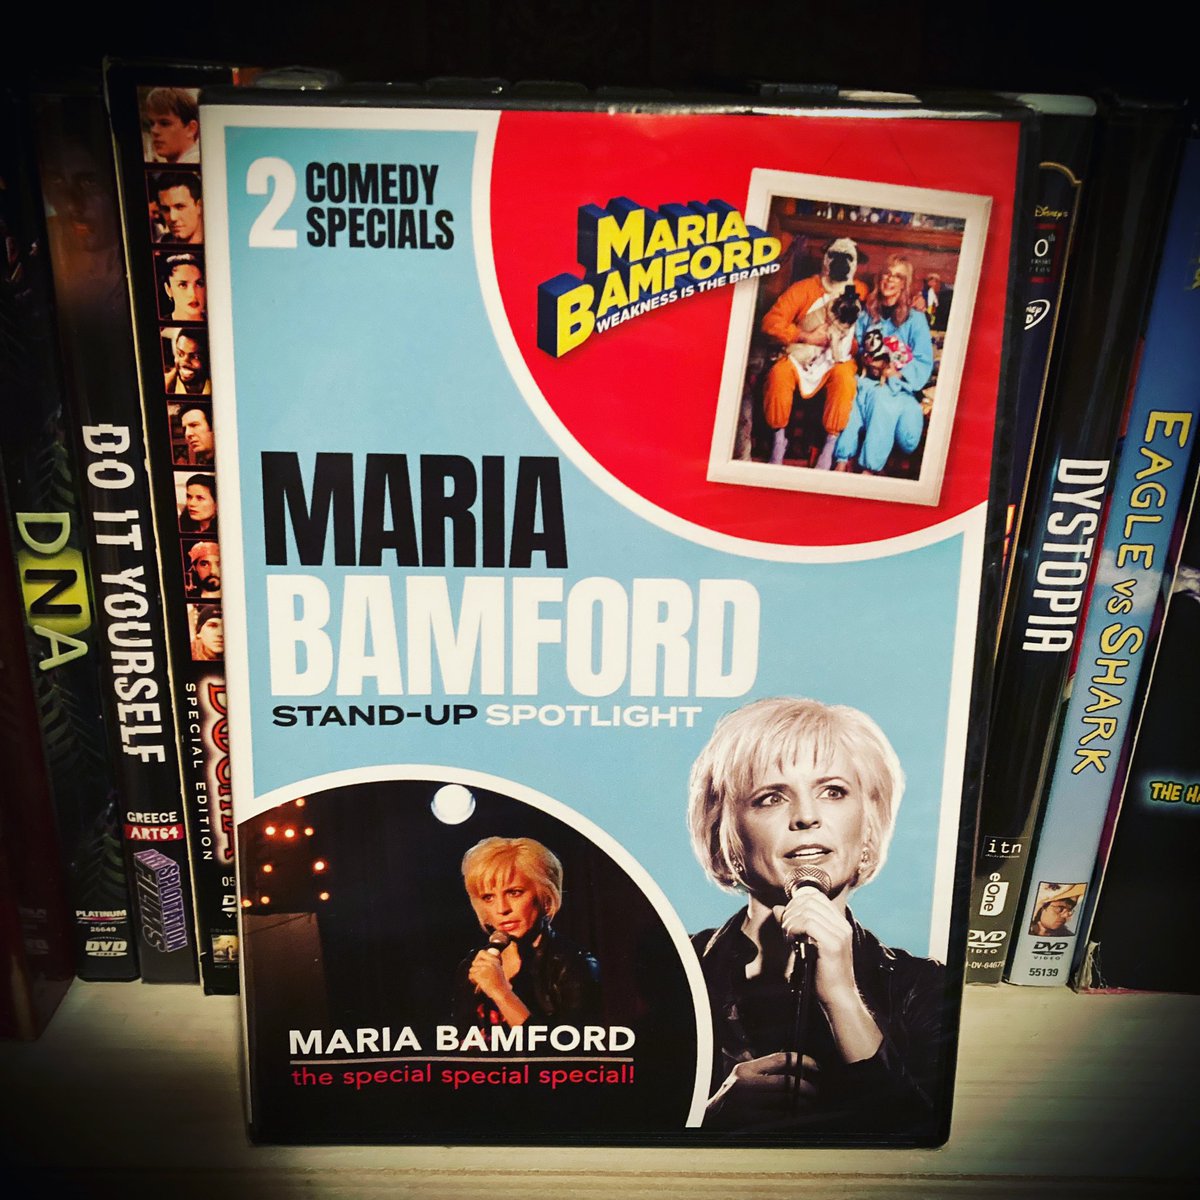 Maria Bamford – Stand-up Spotlight courtesy of @millcreekent. #comedyspecial #standup #dvd